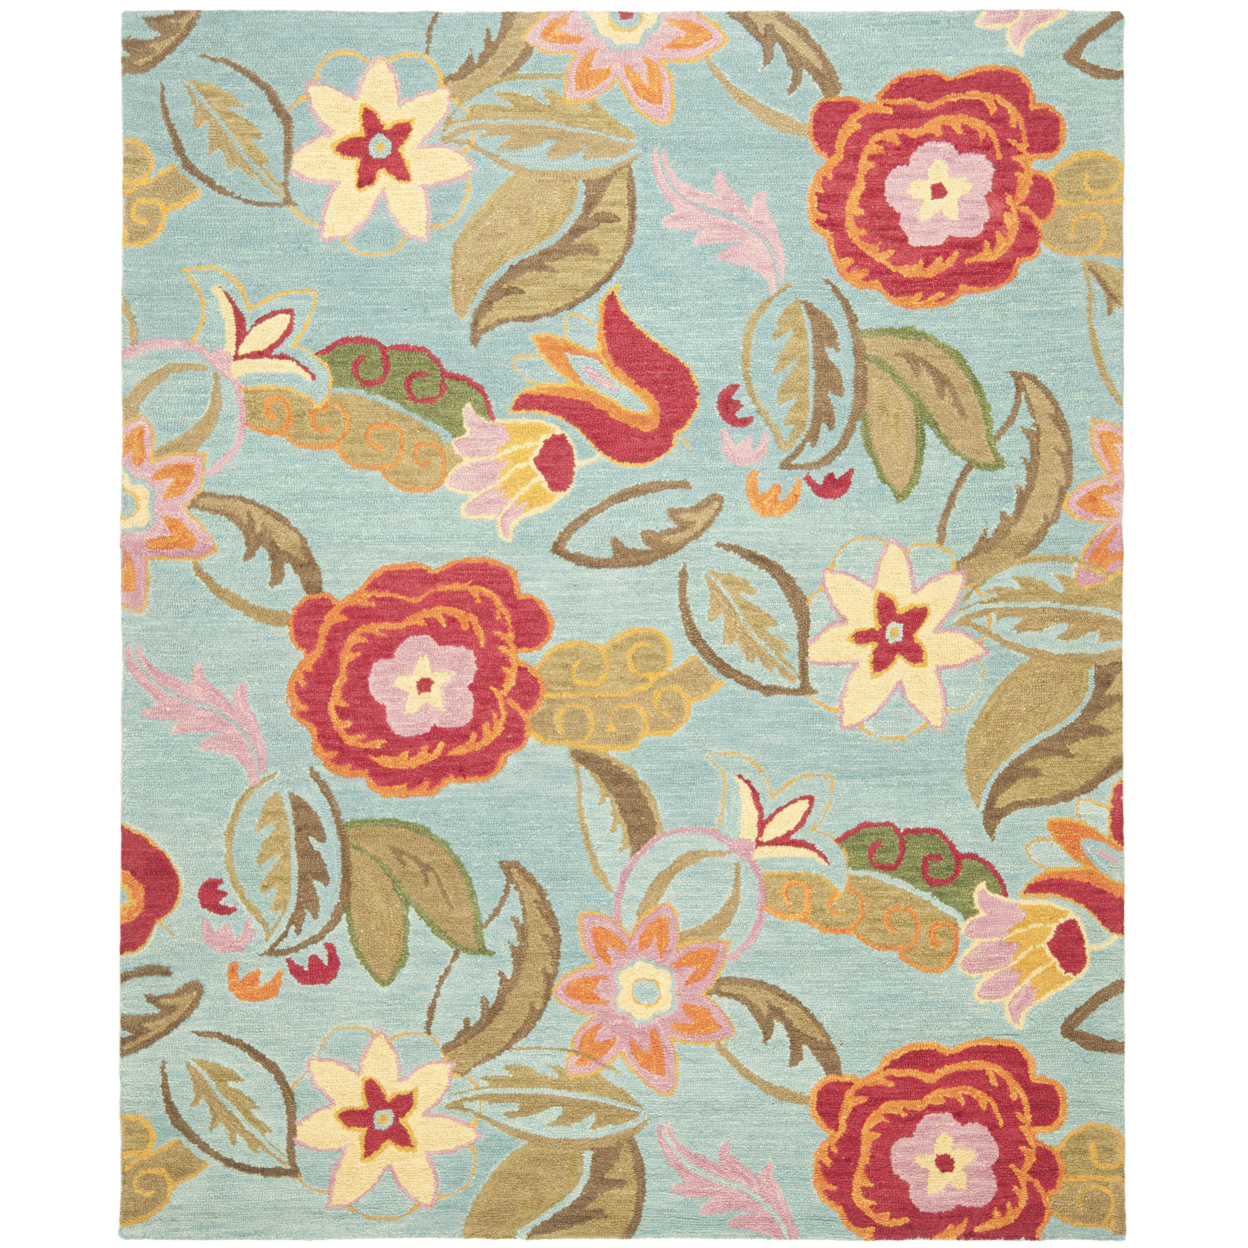 SAFAVIEH Blossom BLM675A Hand-hooked Blue / Multi Rug - 8' X 10'